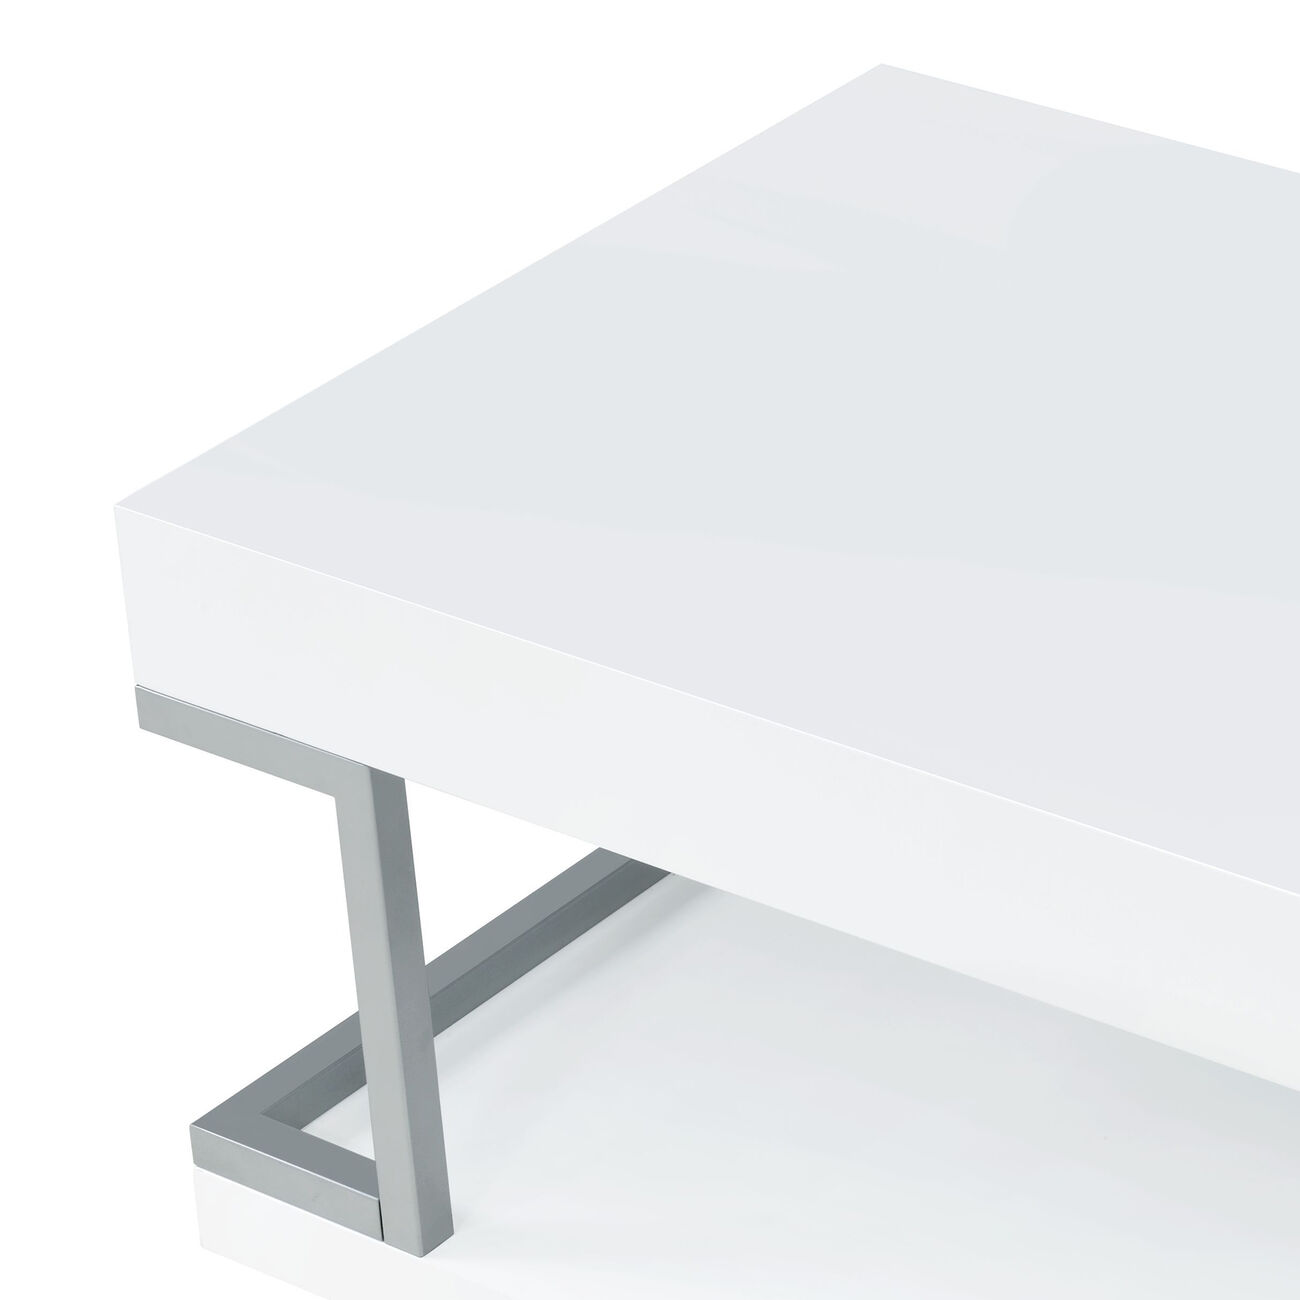 High Gloss Contemporary Coffee Table with Bottom Shelf, White and Silver